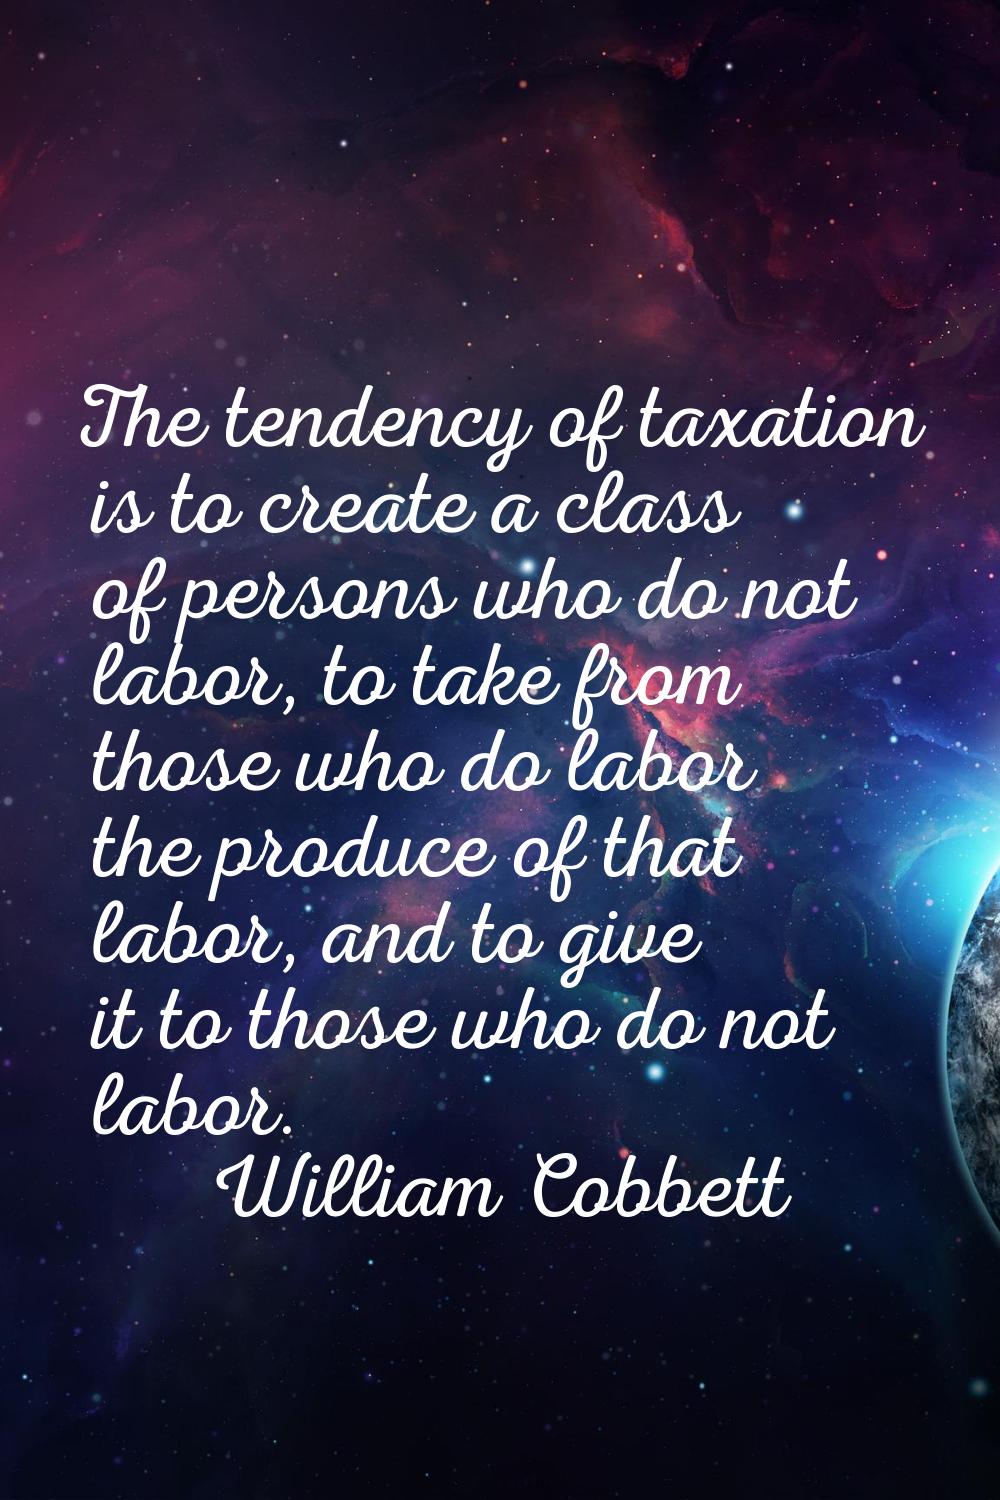 The tendency of taxation is to create a class of persons who do not labor, to take from those who d